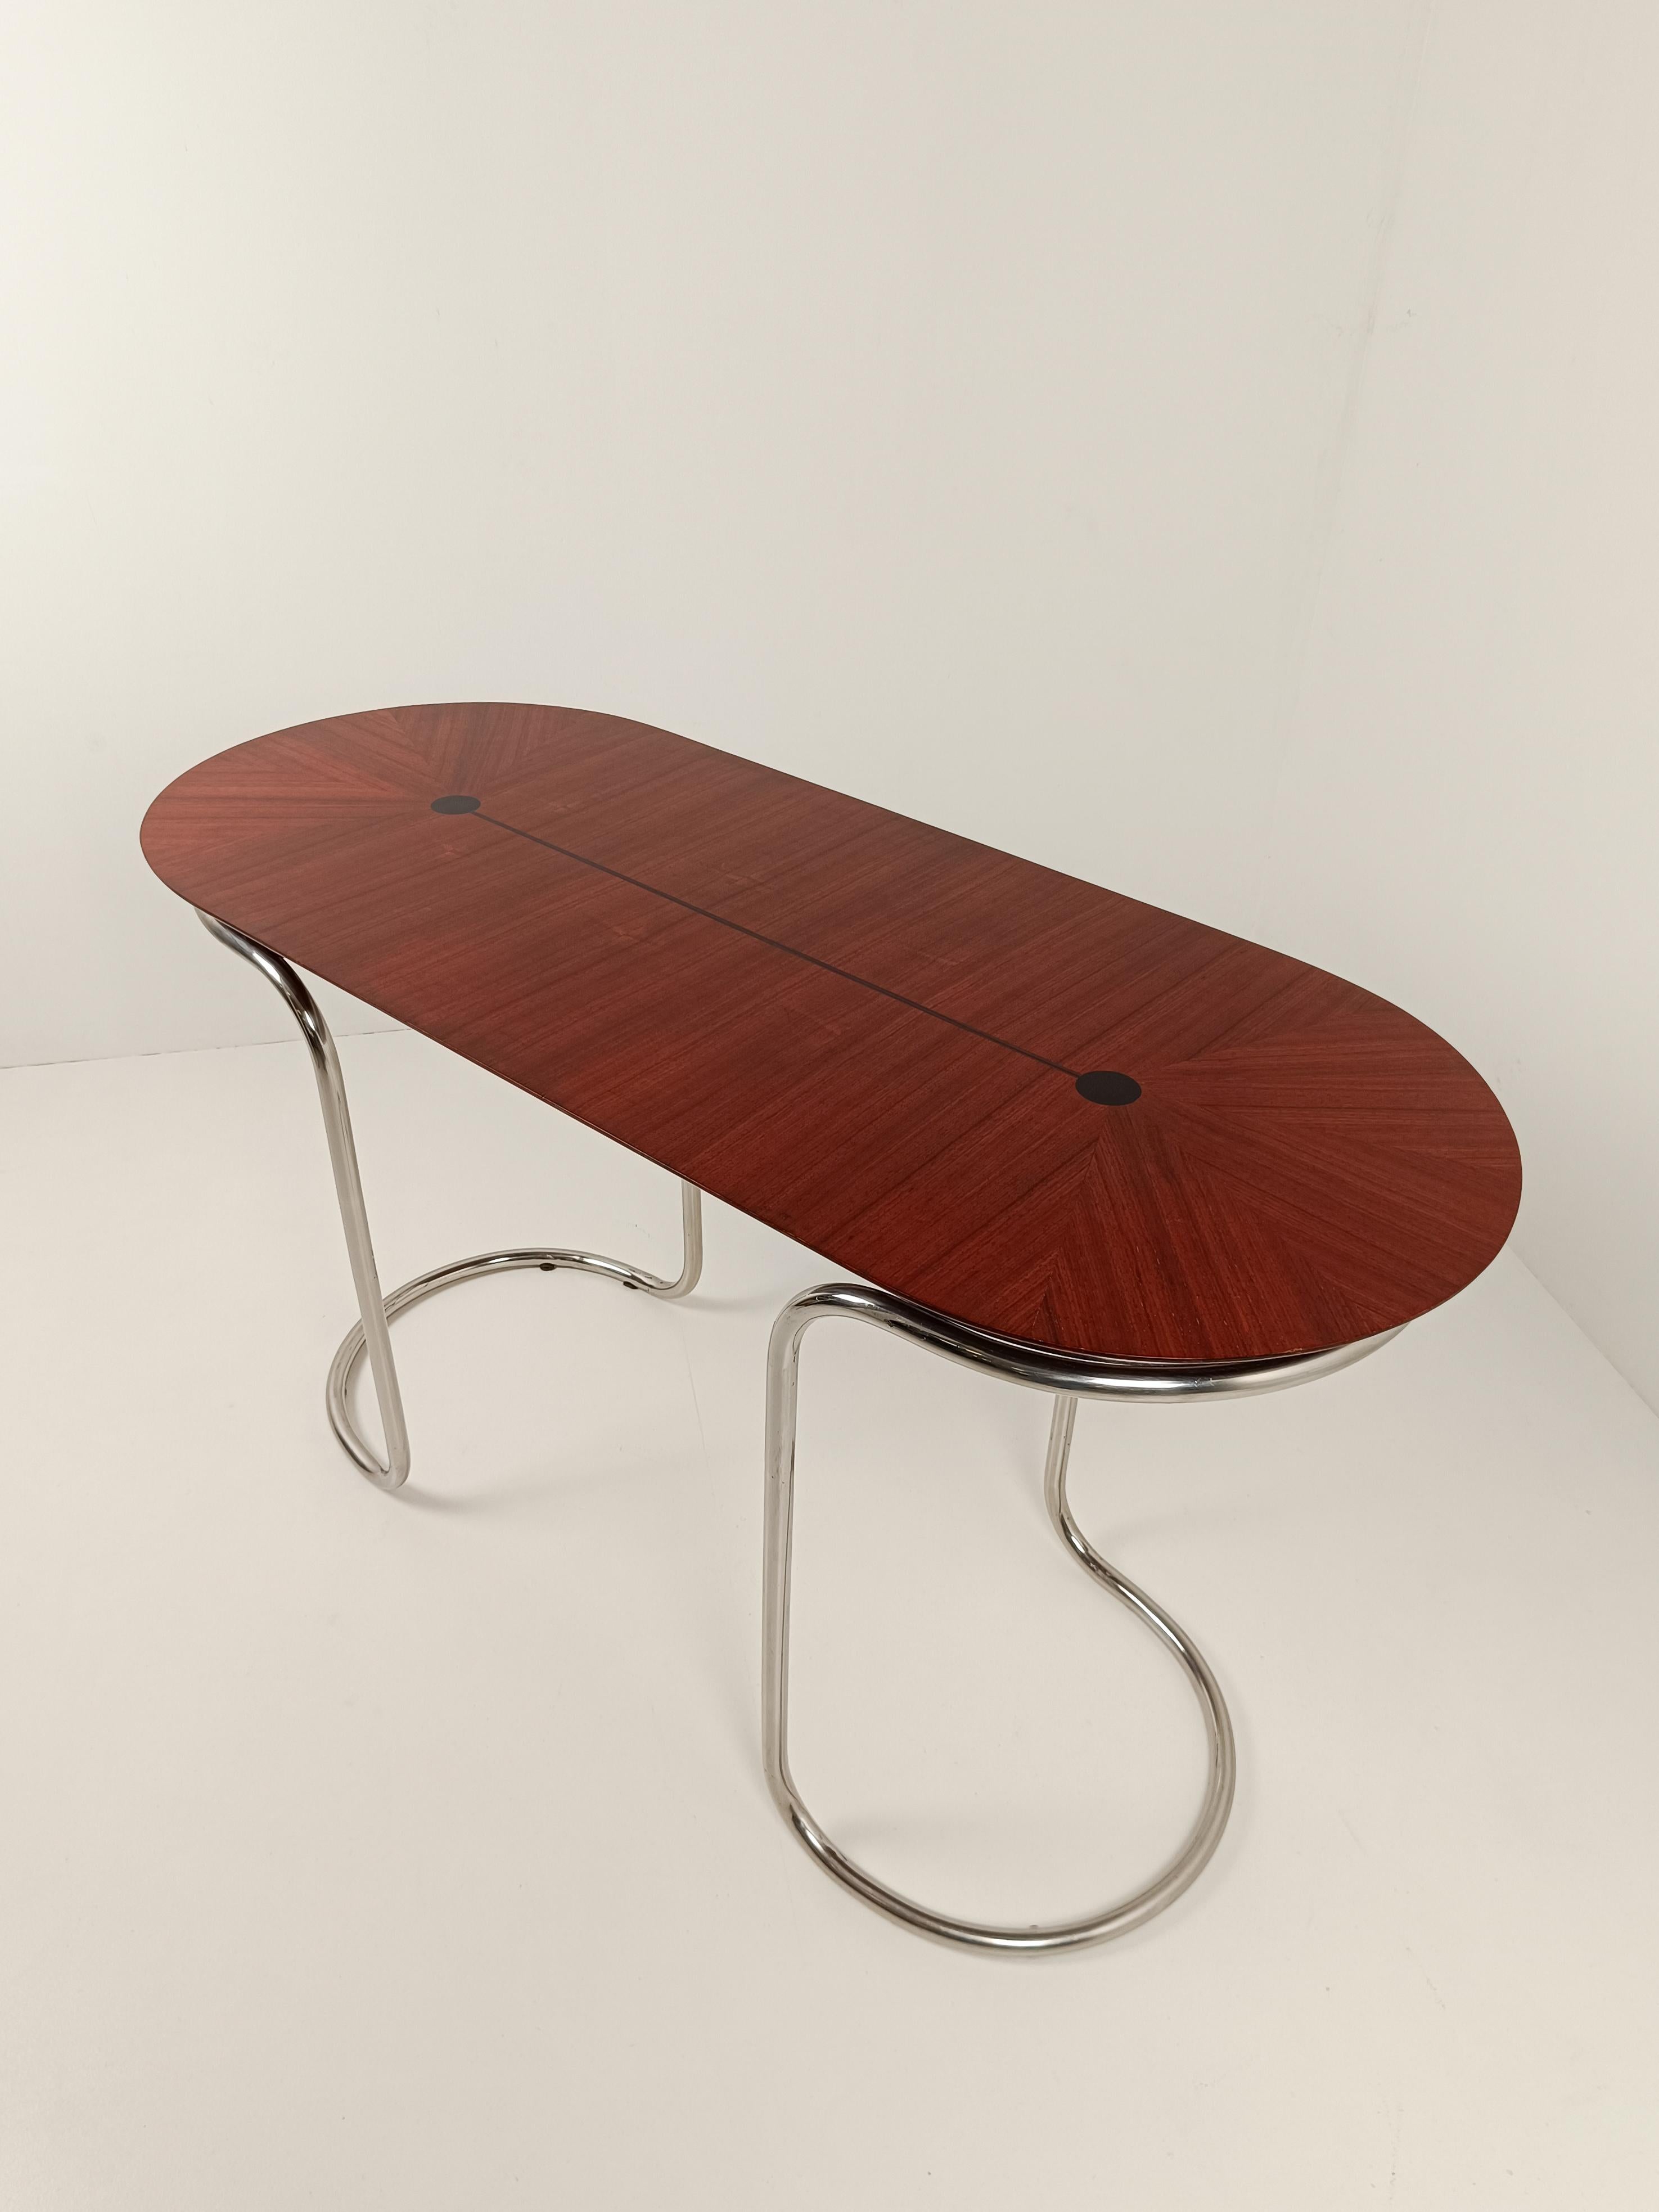 Italian Oval Desk Consolle Table in the style of Giotto Stoppino, Tubular Steel & Wood  For Sale